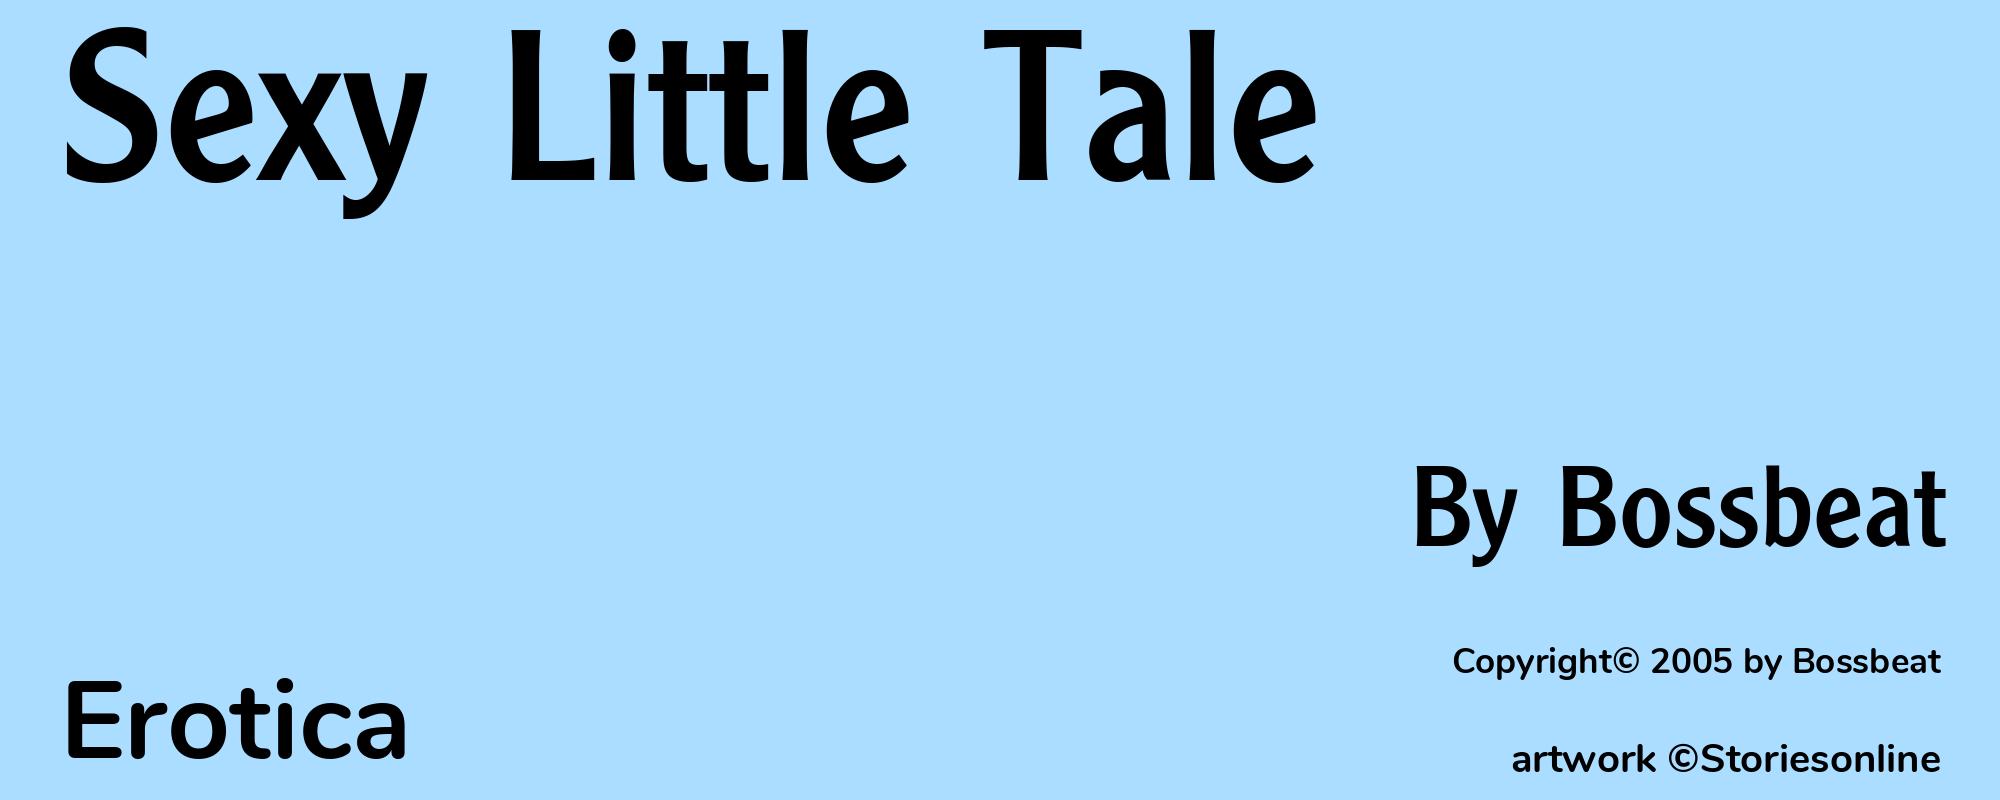 Sexy Little Tale - Cover